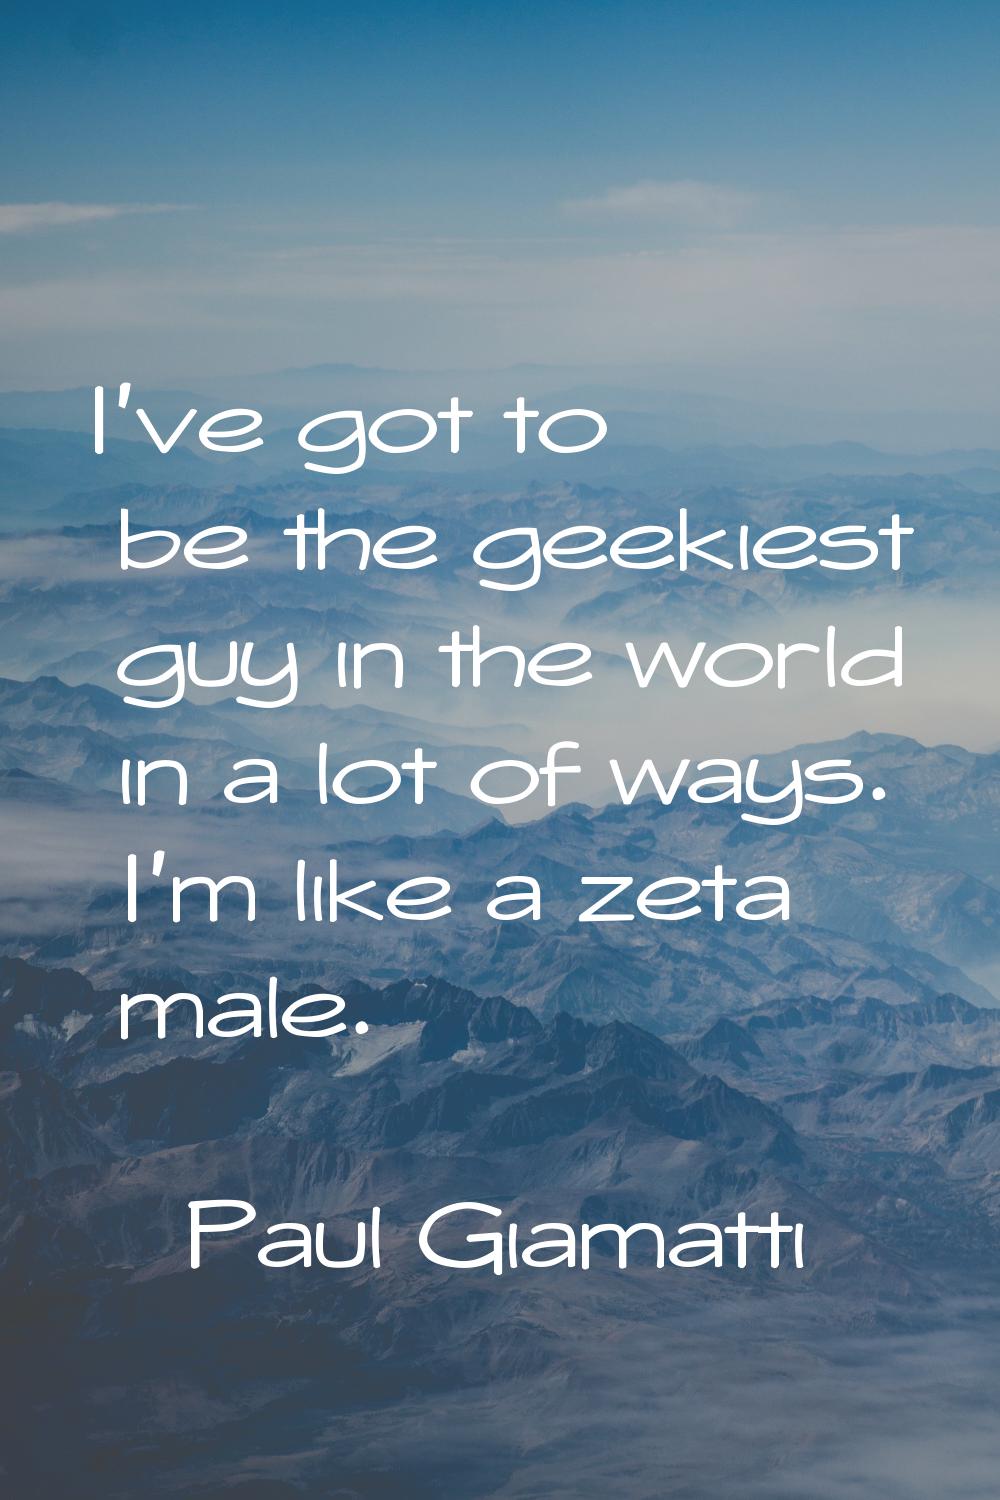 I've got to be the geekiest guy in the world in a lot of ways. I'm like a zeta male.